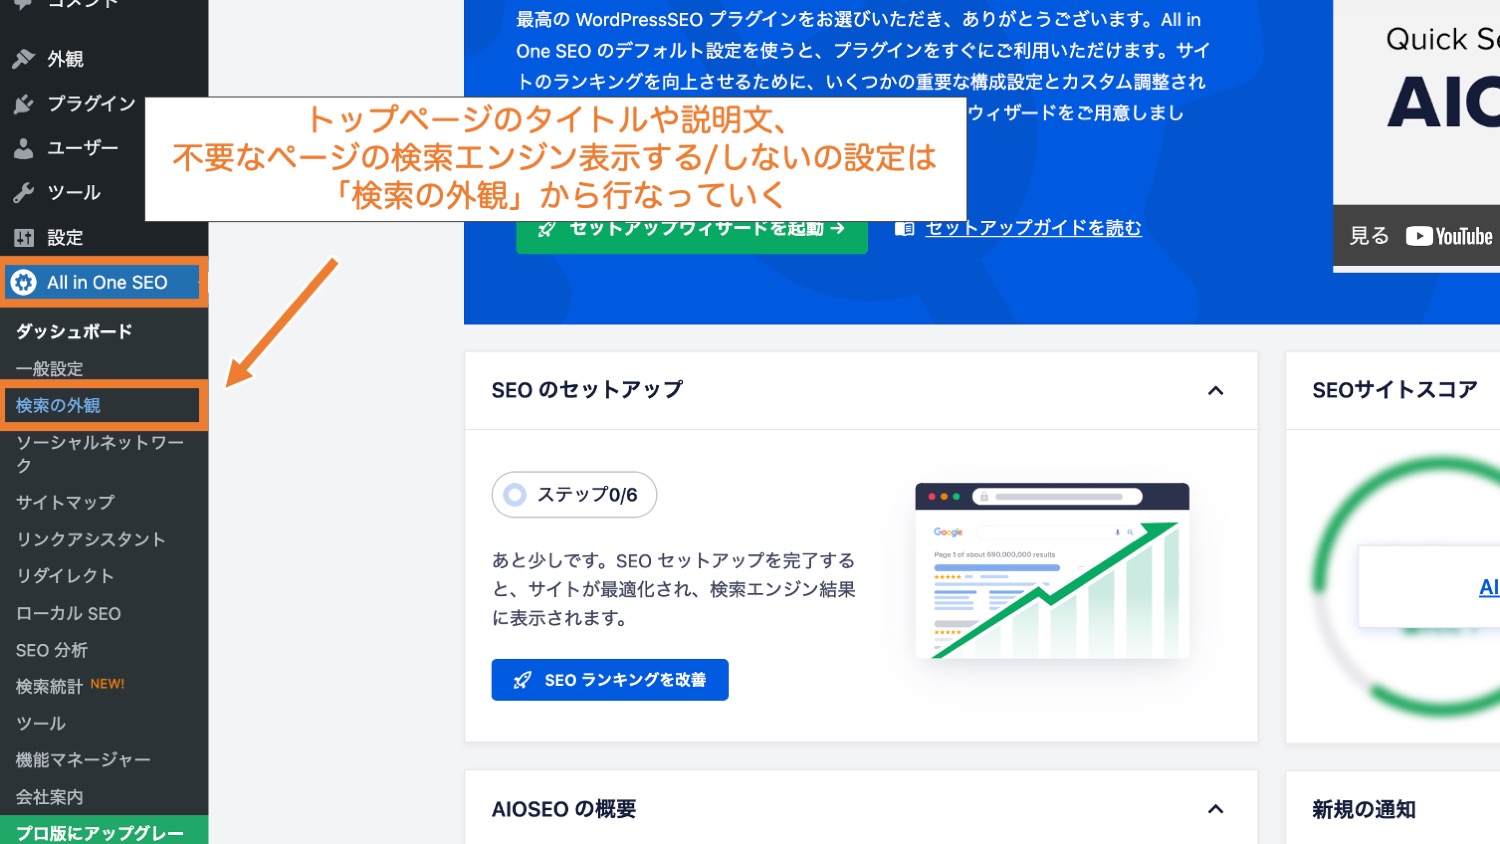 All in One SEOの「検索の外観」設定